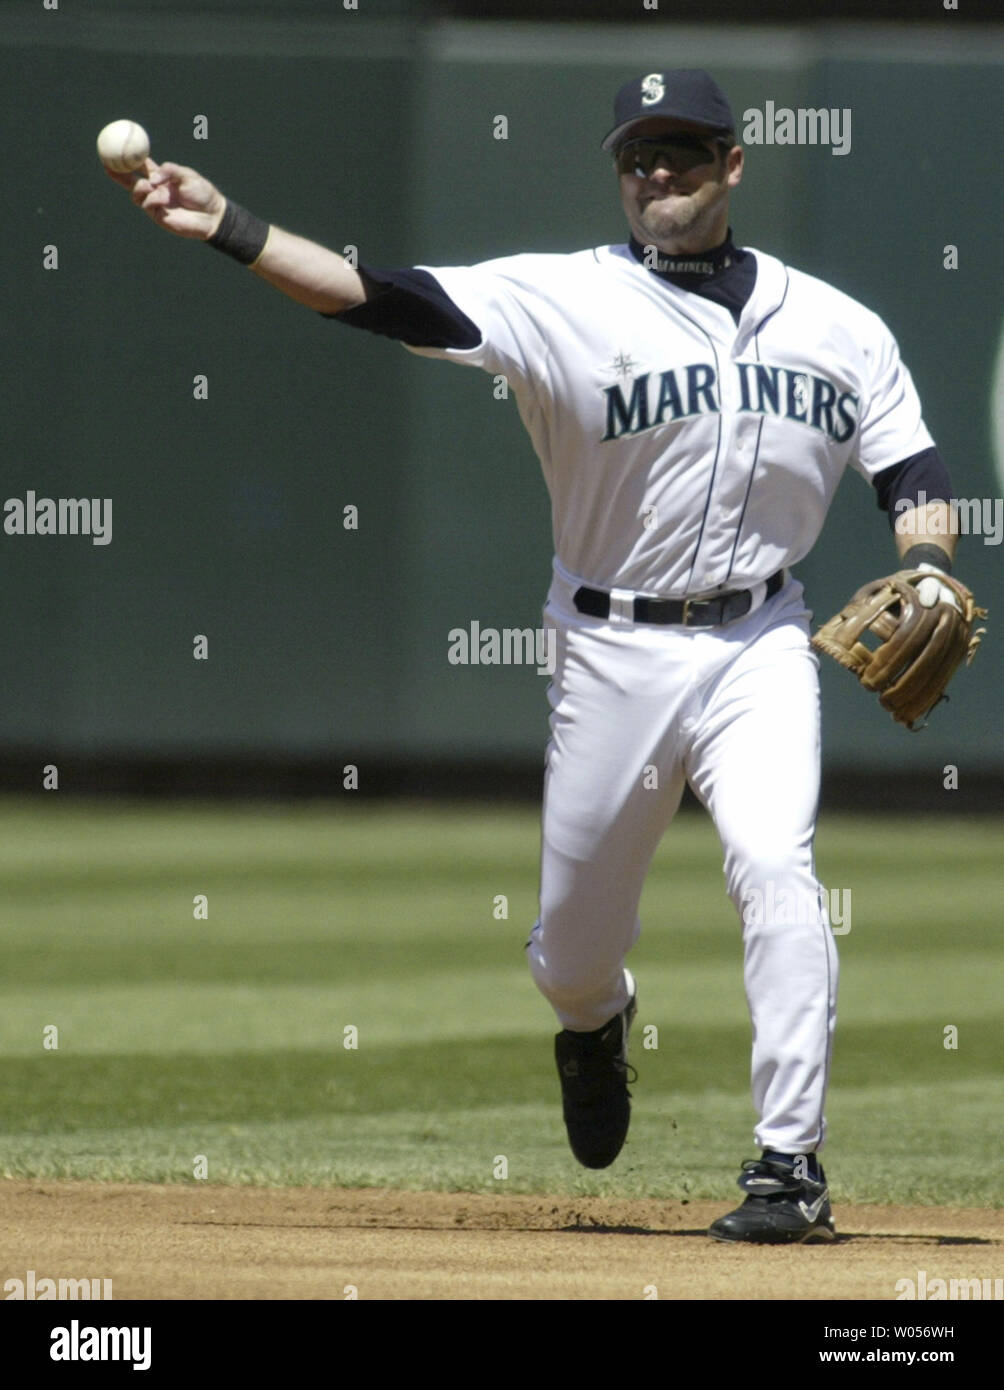 New York Yankees' shortstop Derek Jeter fields a ground ball hit by Seattle  Mariners' Joser Lopez in the second inning at Safeco Field in Seattle on  May 13, 2007. Jeter threw out